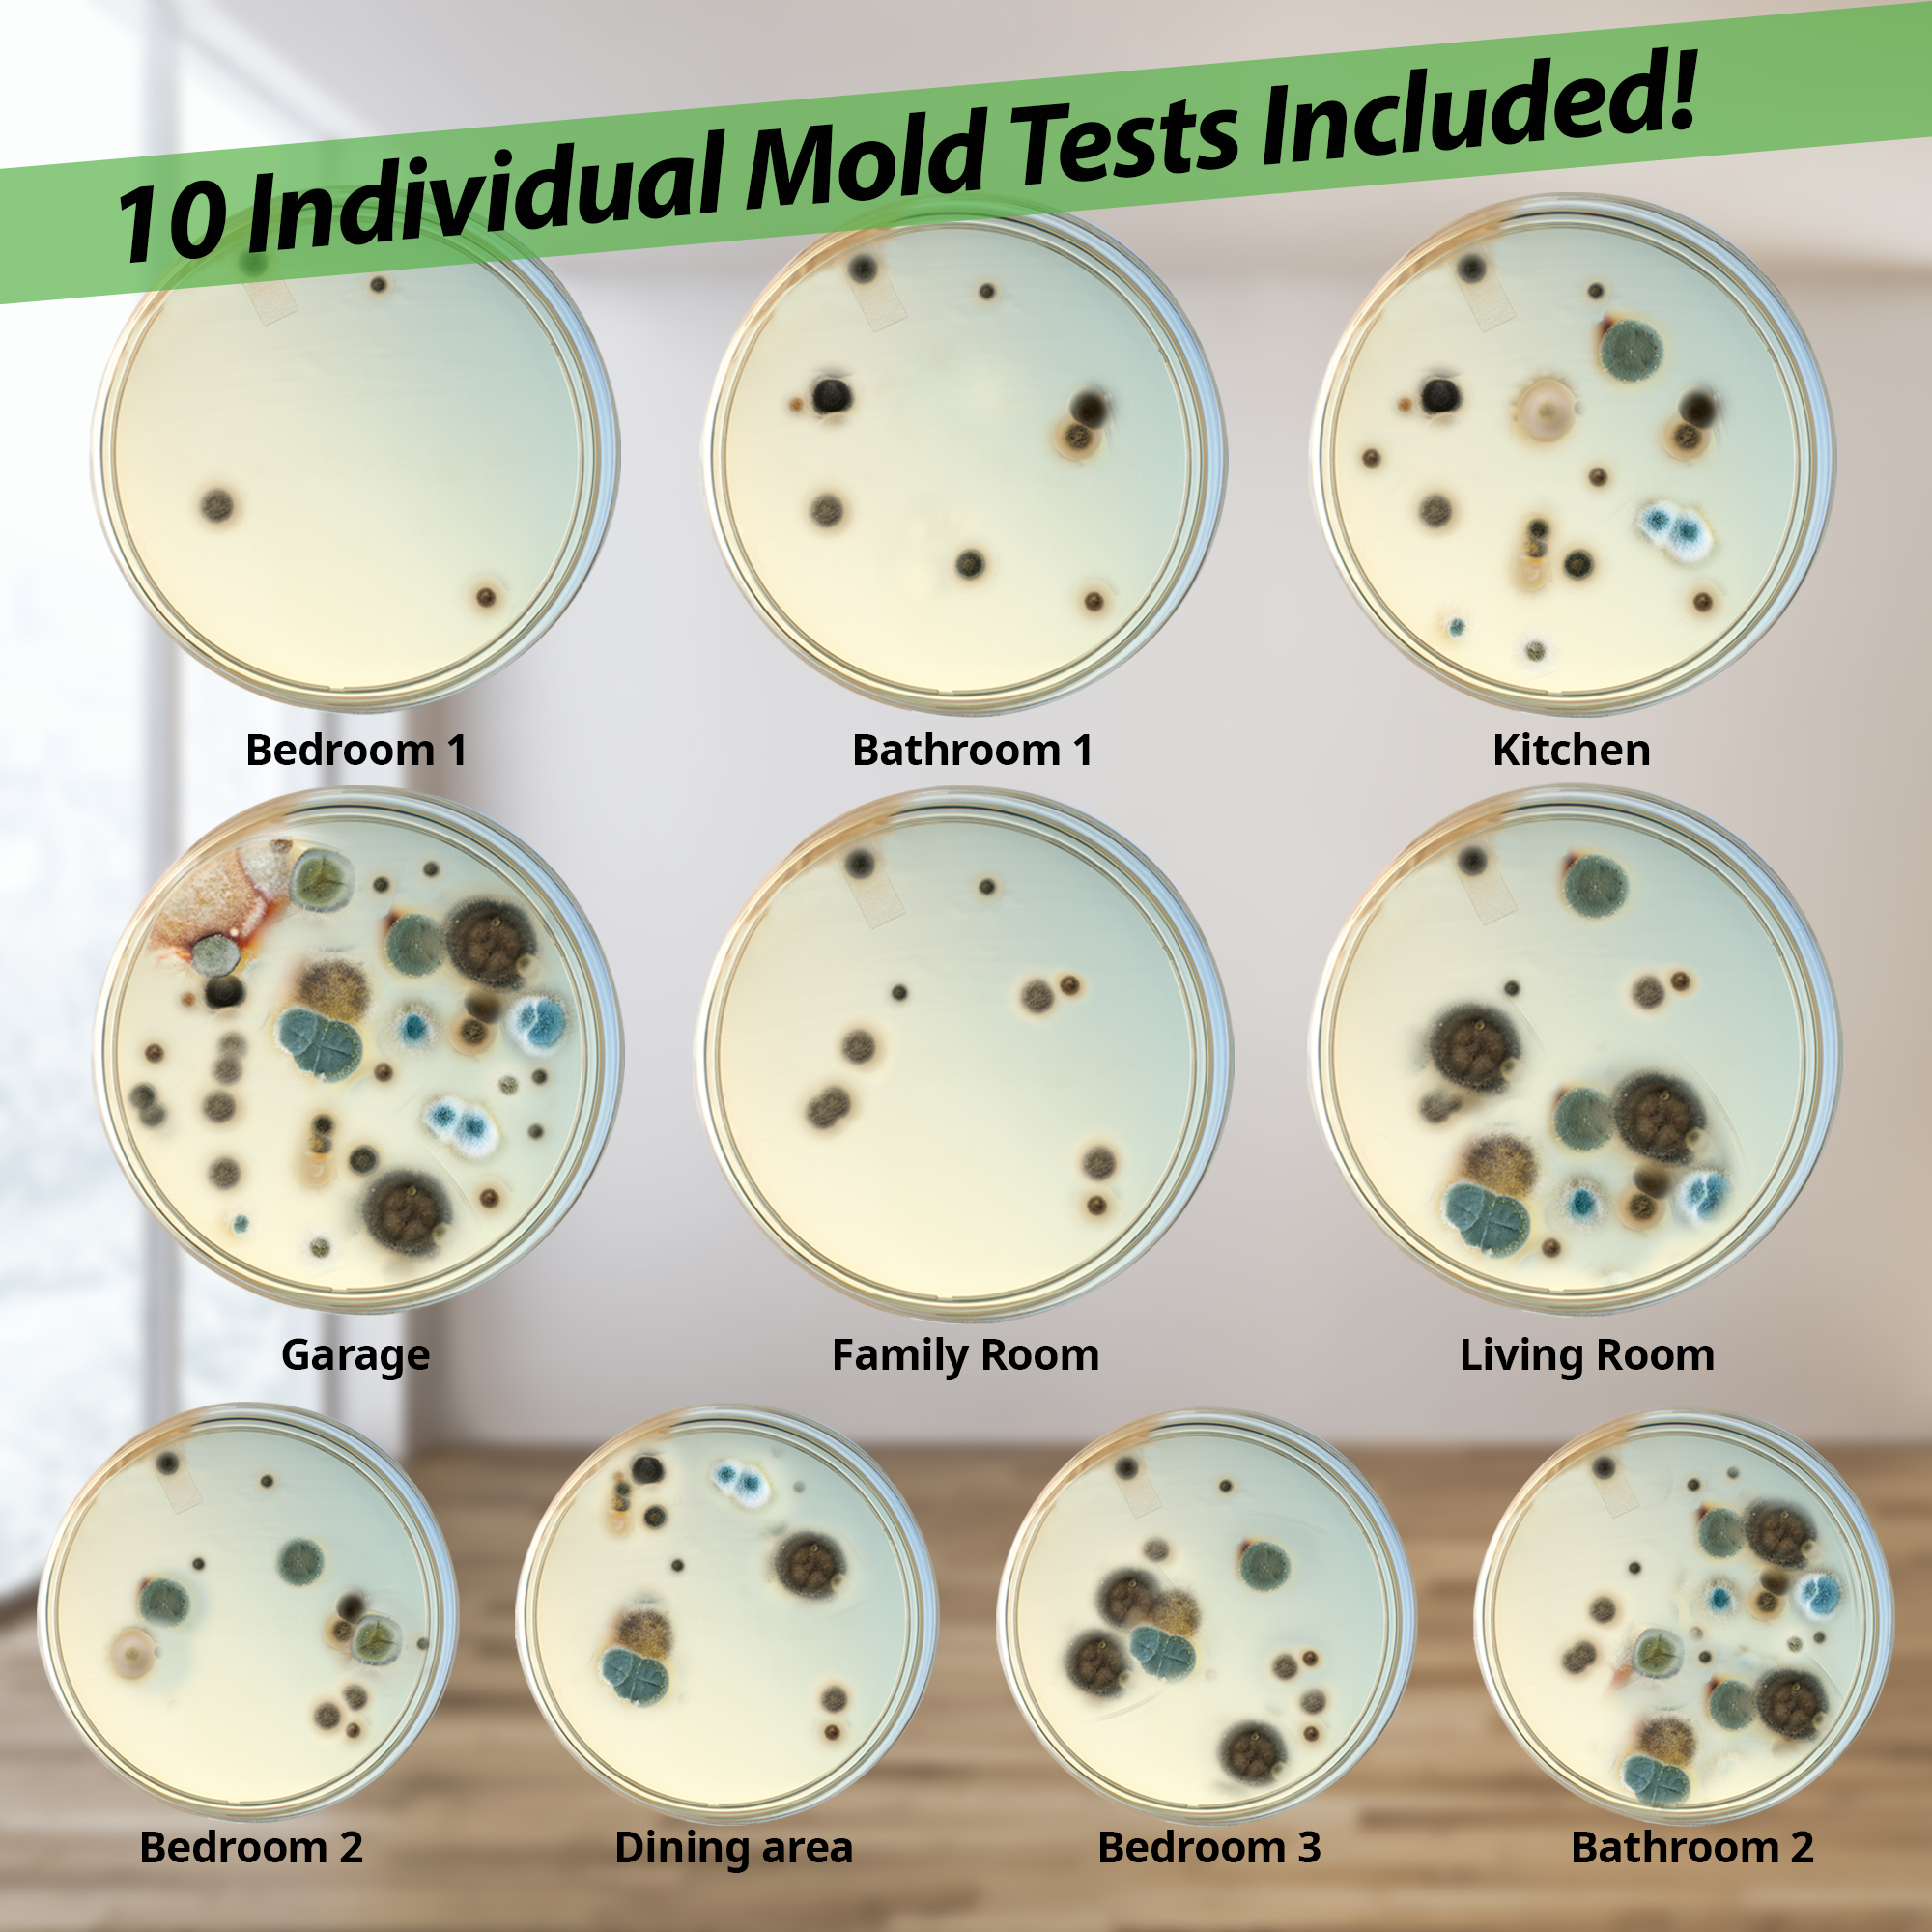 Are At-Home Mold Test Kits Reliable? - My Pure Environment